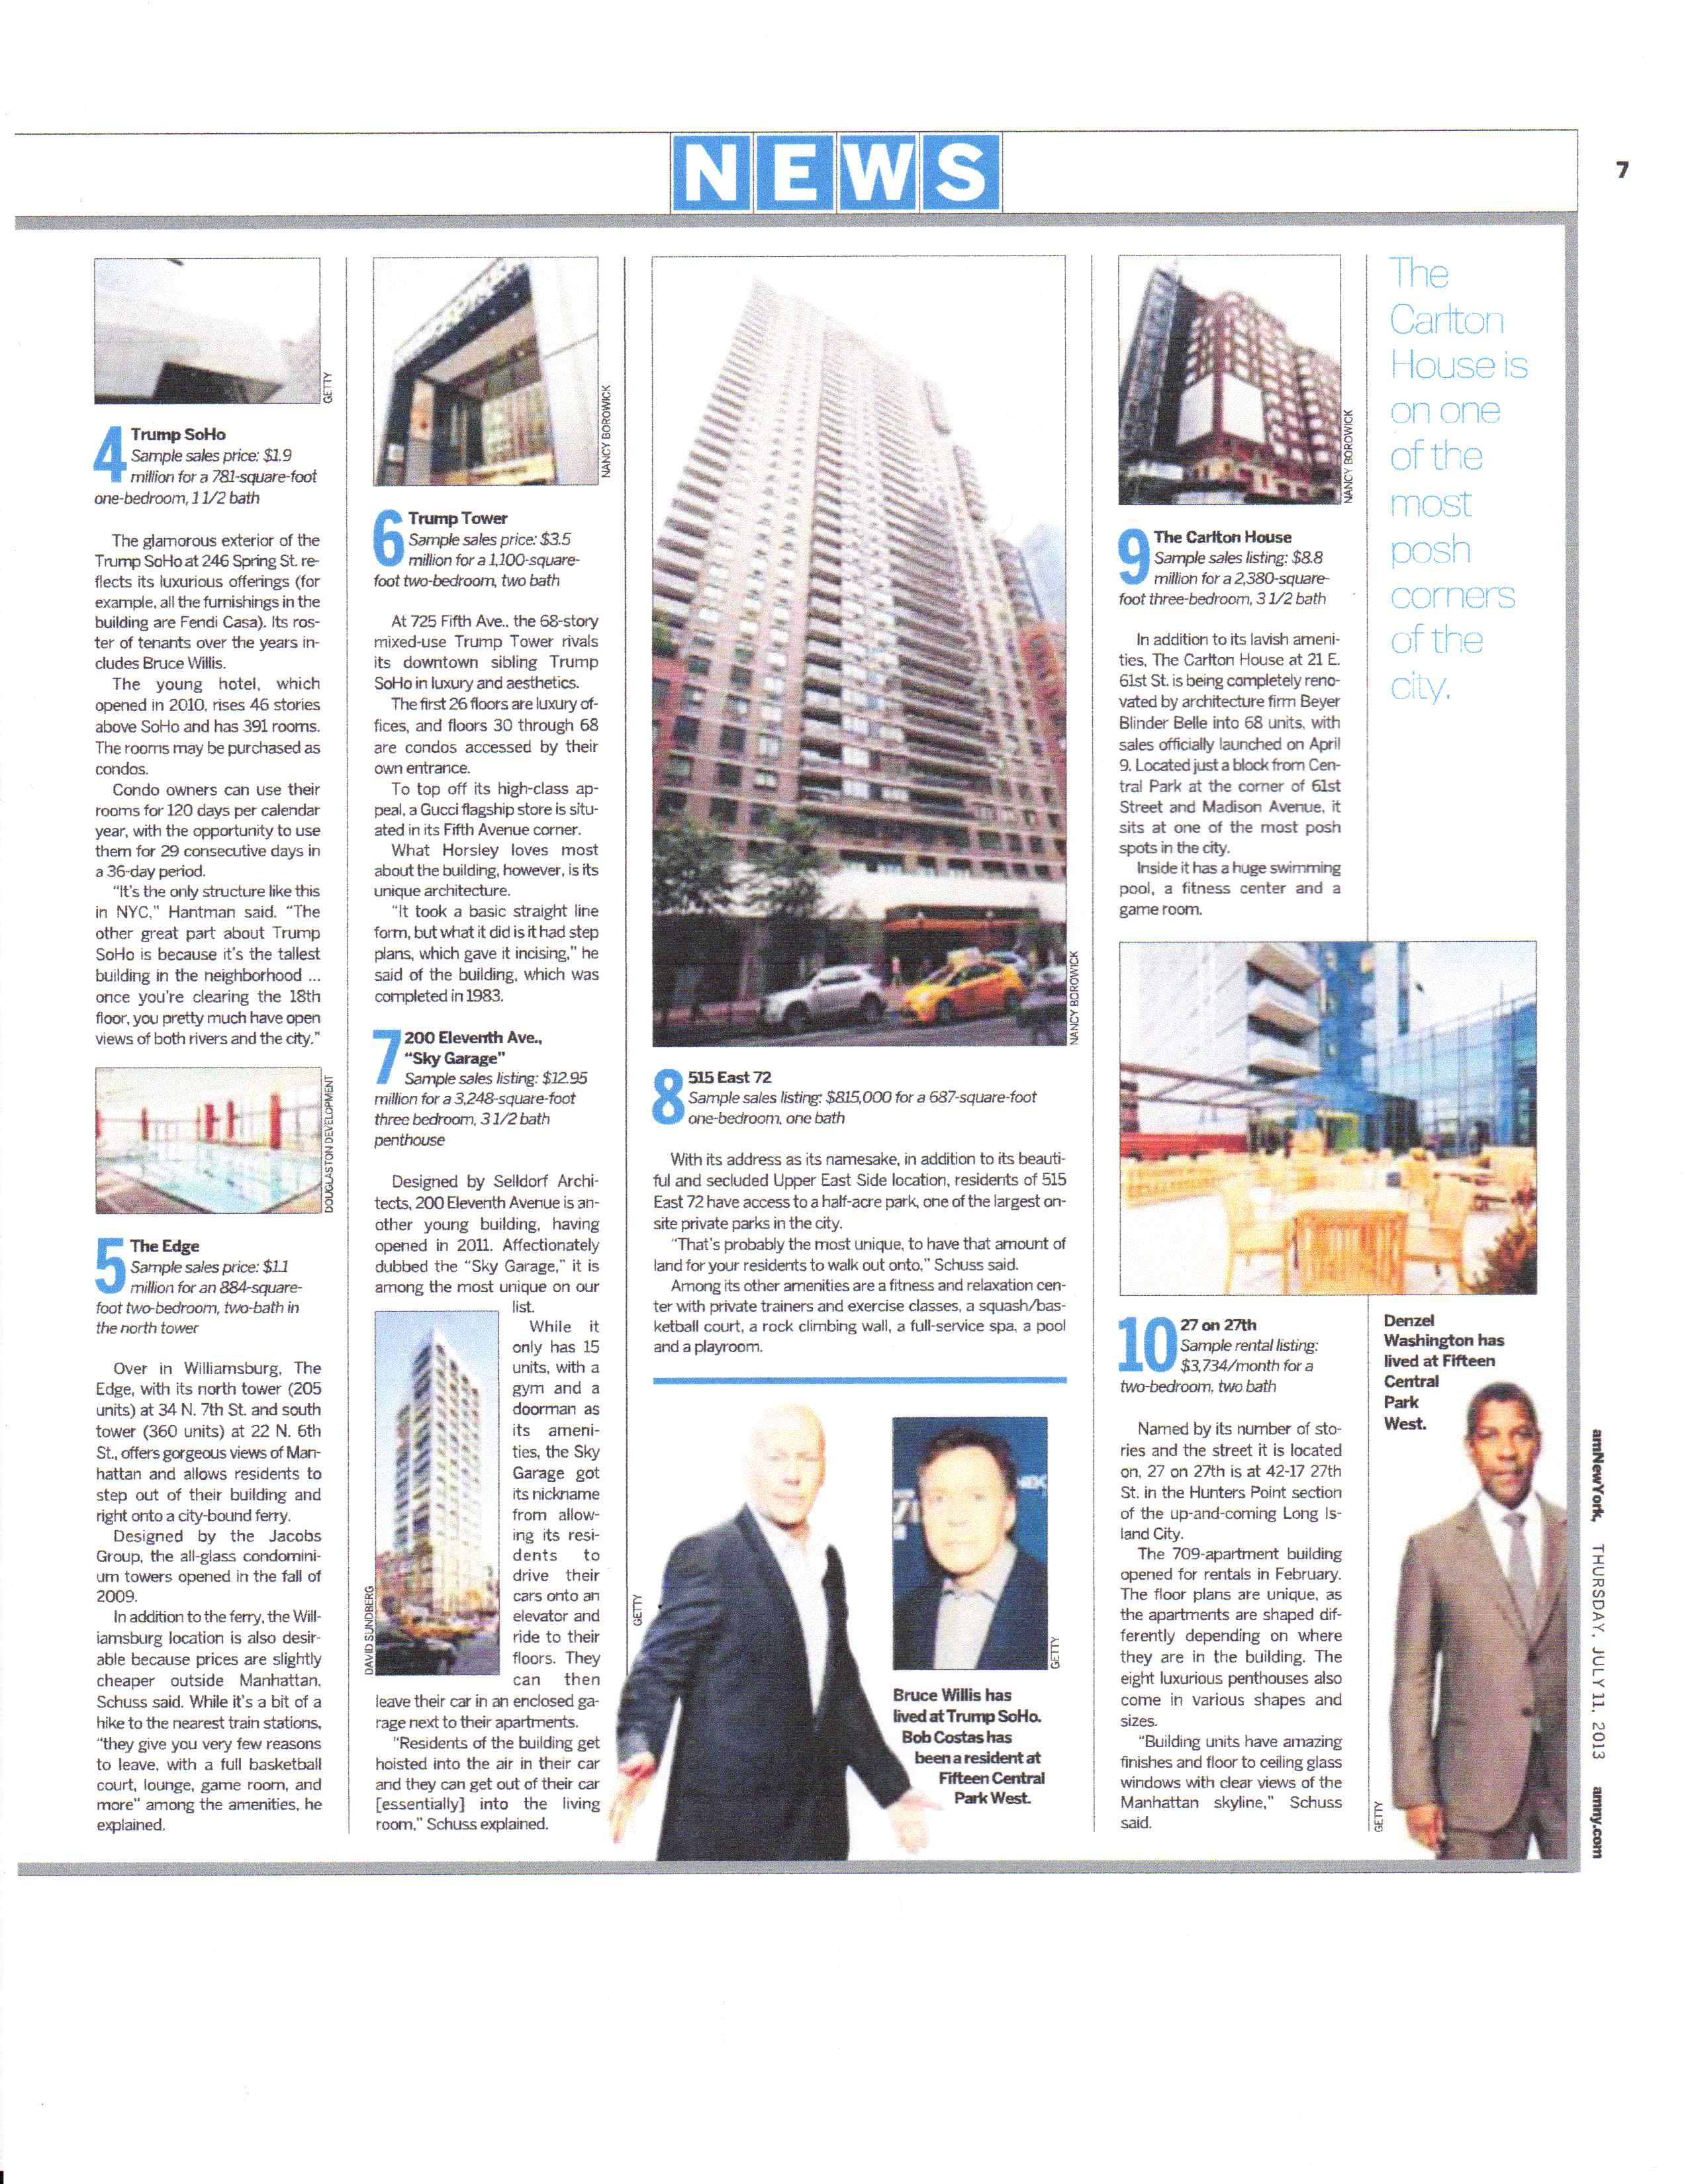 Our project, 27 on 27th was recognized in AM New York as Top Ten " New York City's Glitzy Digs" in their July 2013 article.